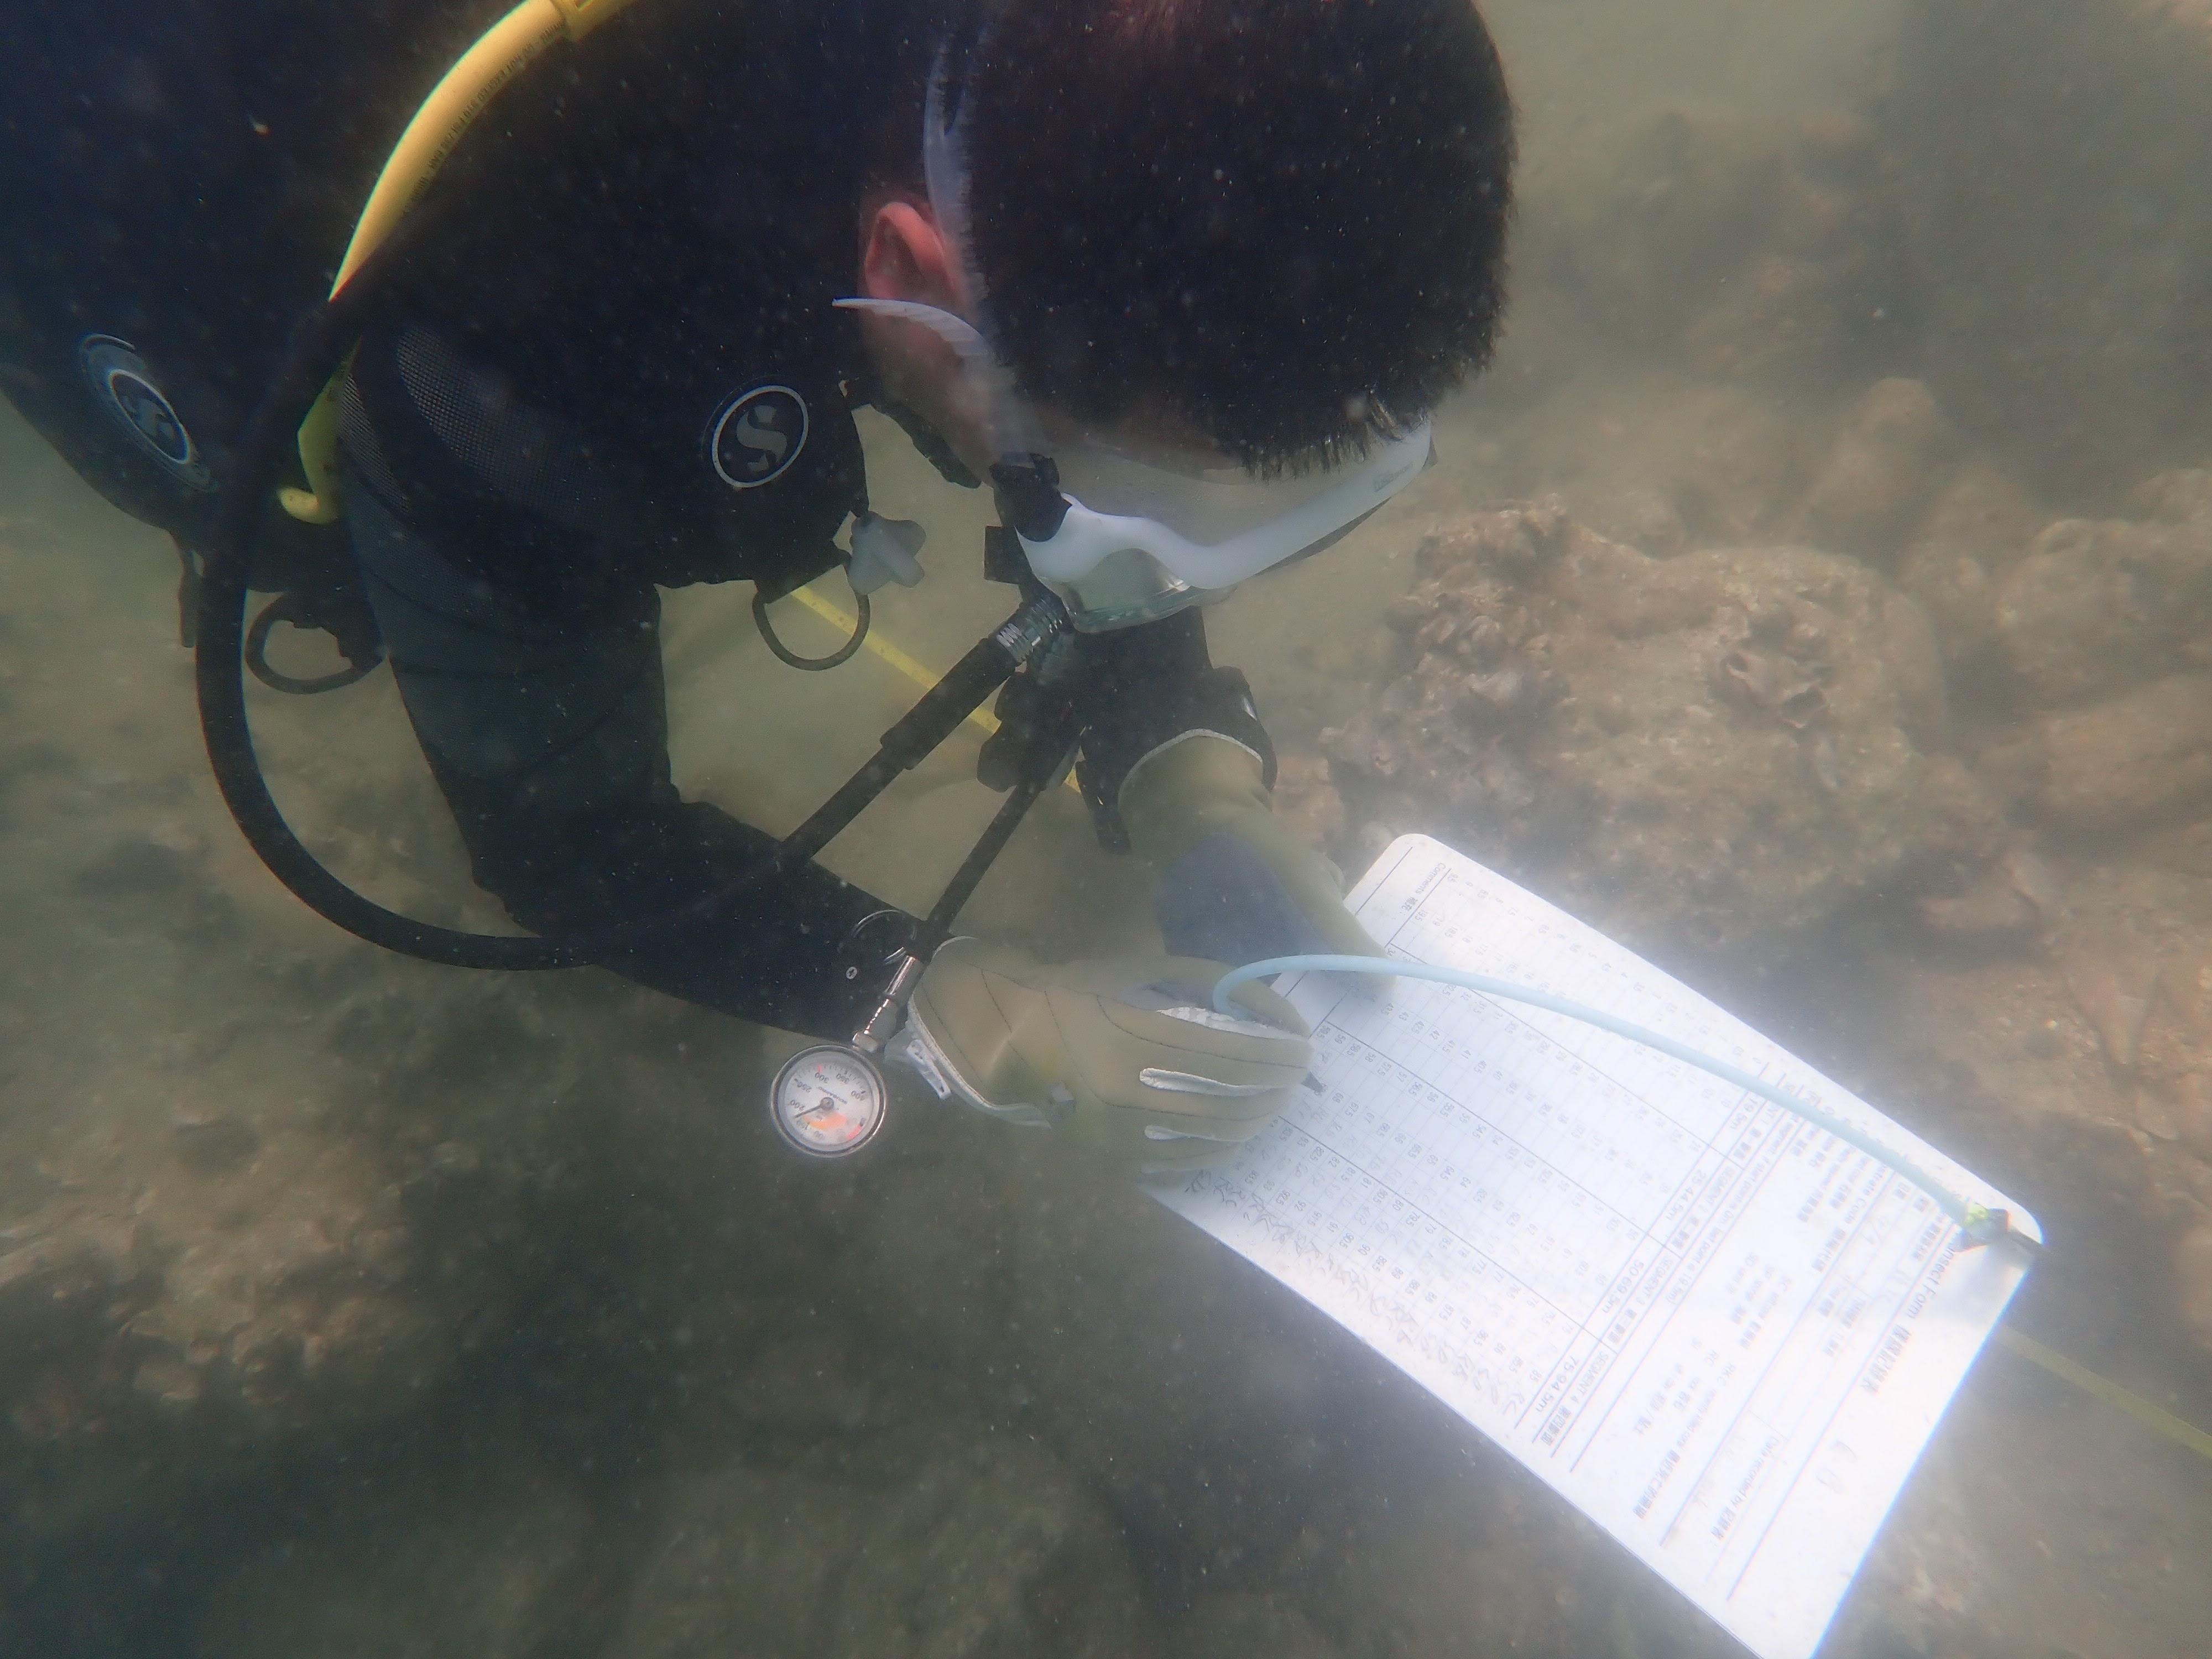 The Agriculture, Fisheries and Conservation Department announced today (December 11) that the Reef Check this year showed that local corals are generally in a healthy and stable condition and that the species diversity remains on the high side. Photo shows a Reef Check diver conducting a coral survey.